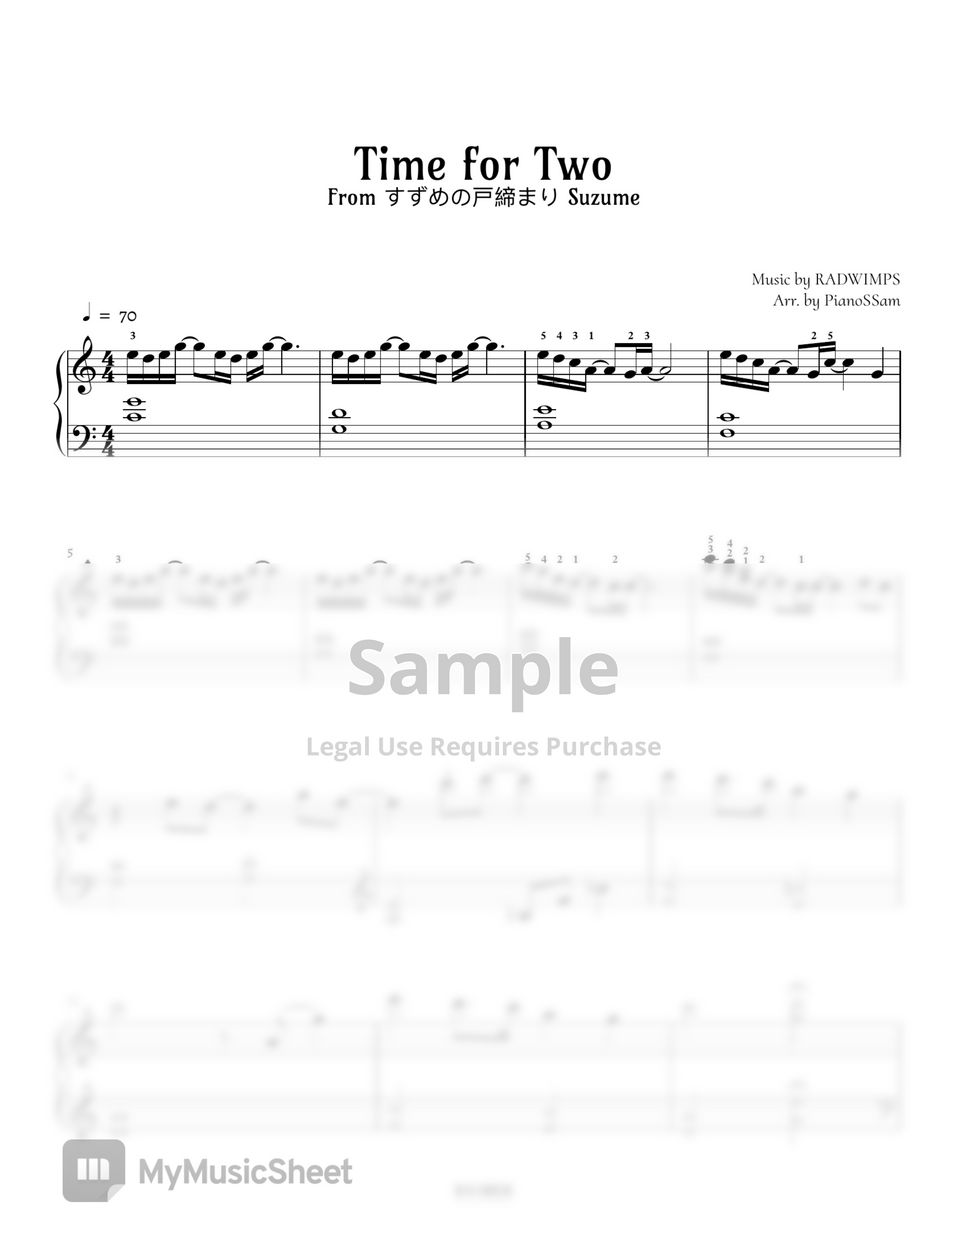 RADWIMP - Time for Two (Suzume) by PianoSSam